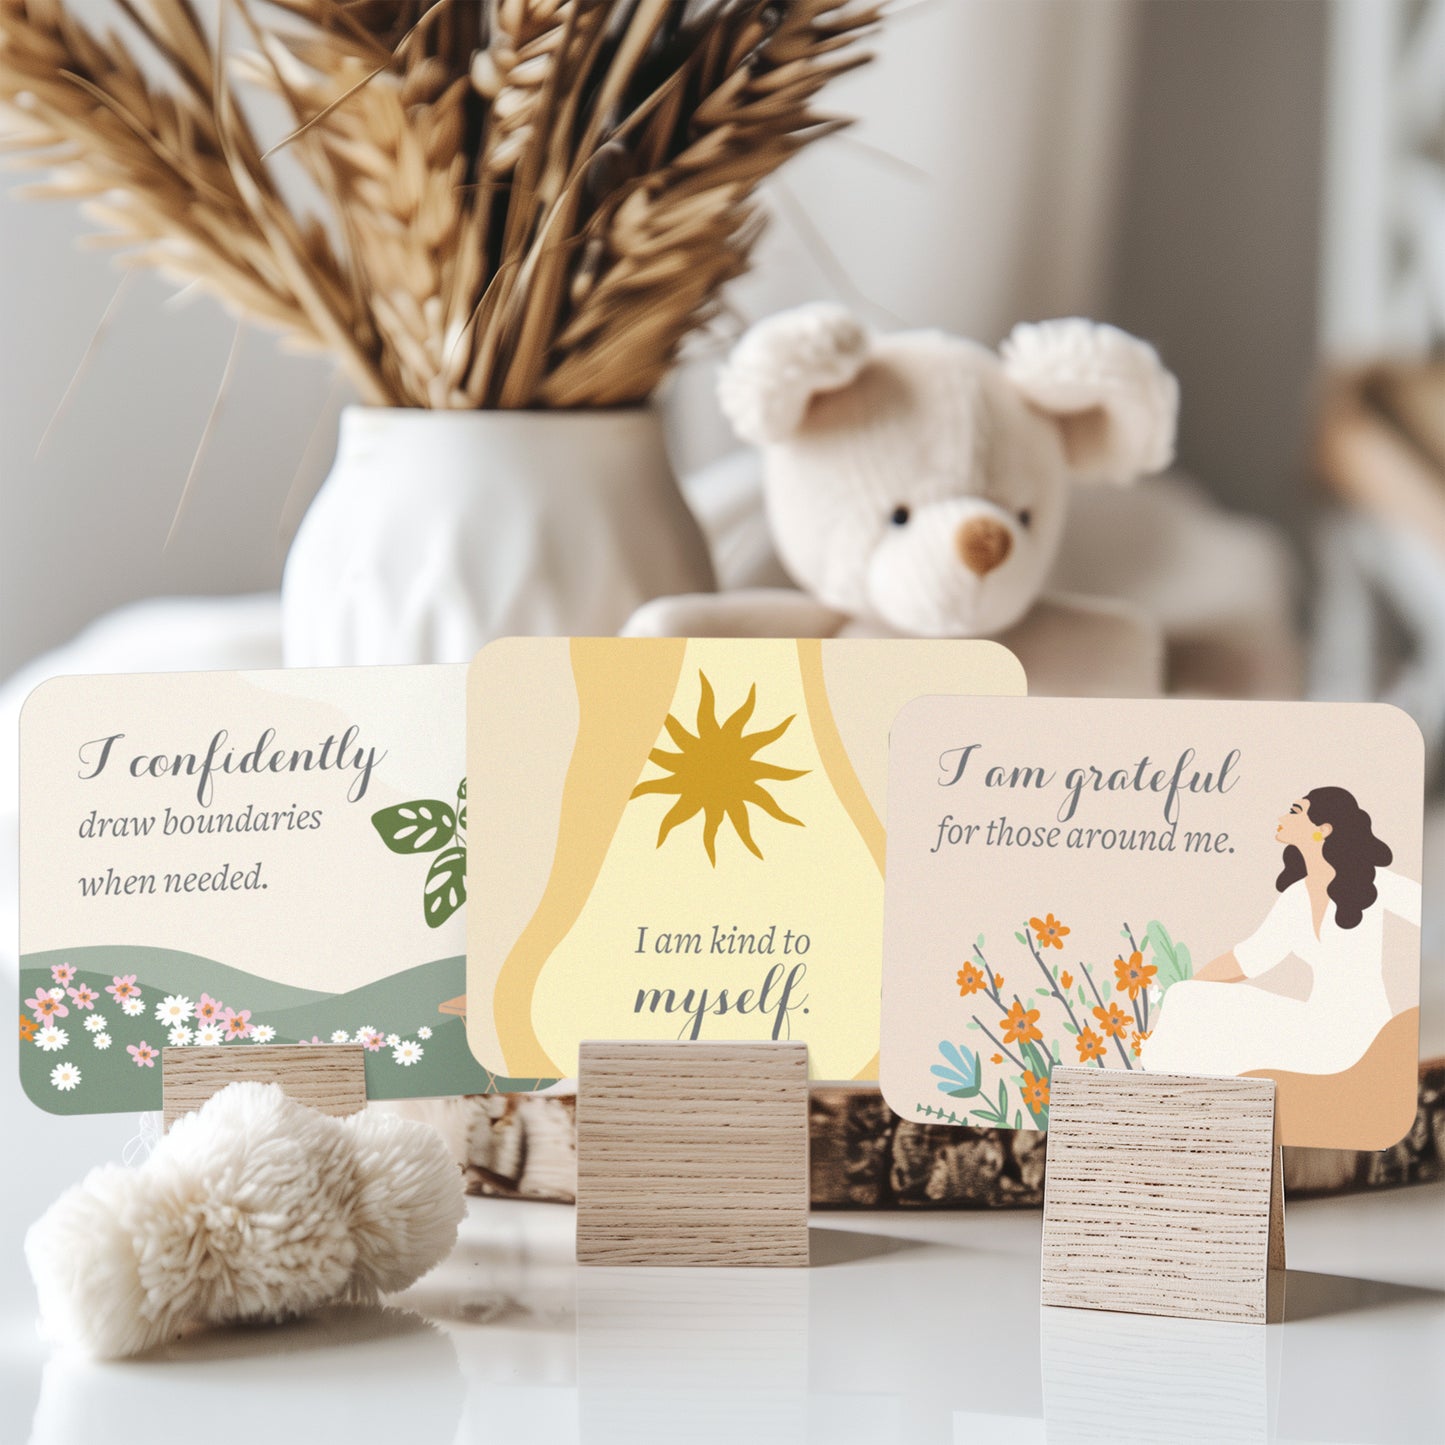 NEW MOM AFFIRMATION CARDS - Words of Encouragement and Support